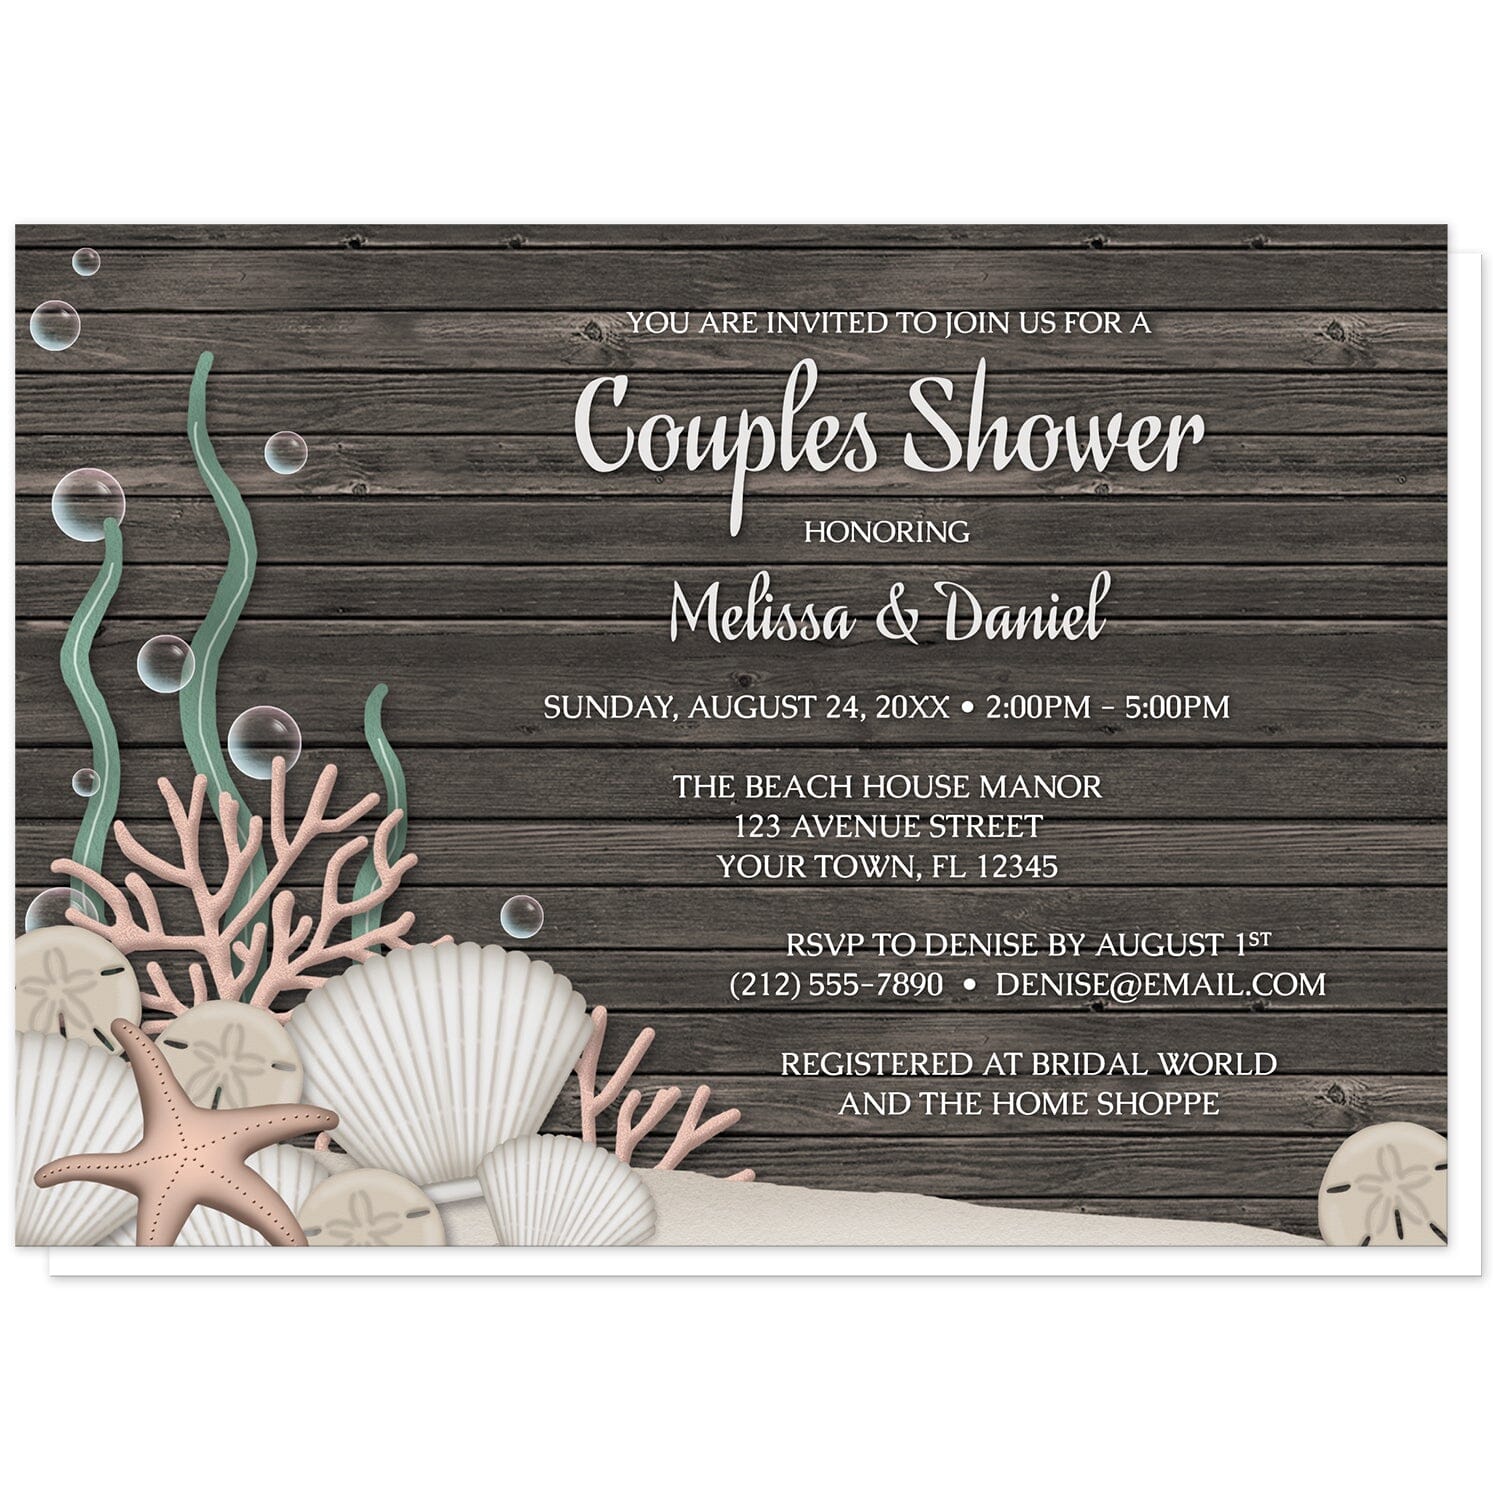 Rustic Beach Seashells and Wood Couples Shower Invitations at Artistically Invited. Rustic beach seashells and wood couples shower invitations with a rustic "on the beach" or "under the sea" theme. They are designed with a dark wood pattern, sandy seabed, assorted seashells, coral, and kelp. Your personalized couples shower celebration details are custom printed in white over the wood background.